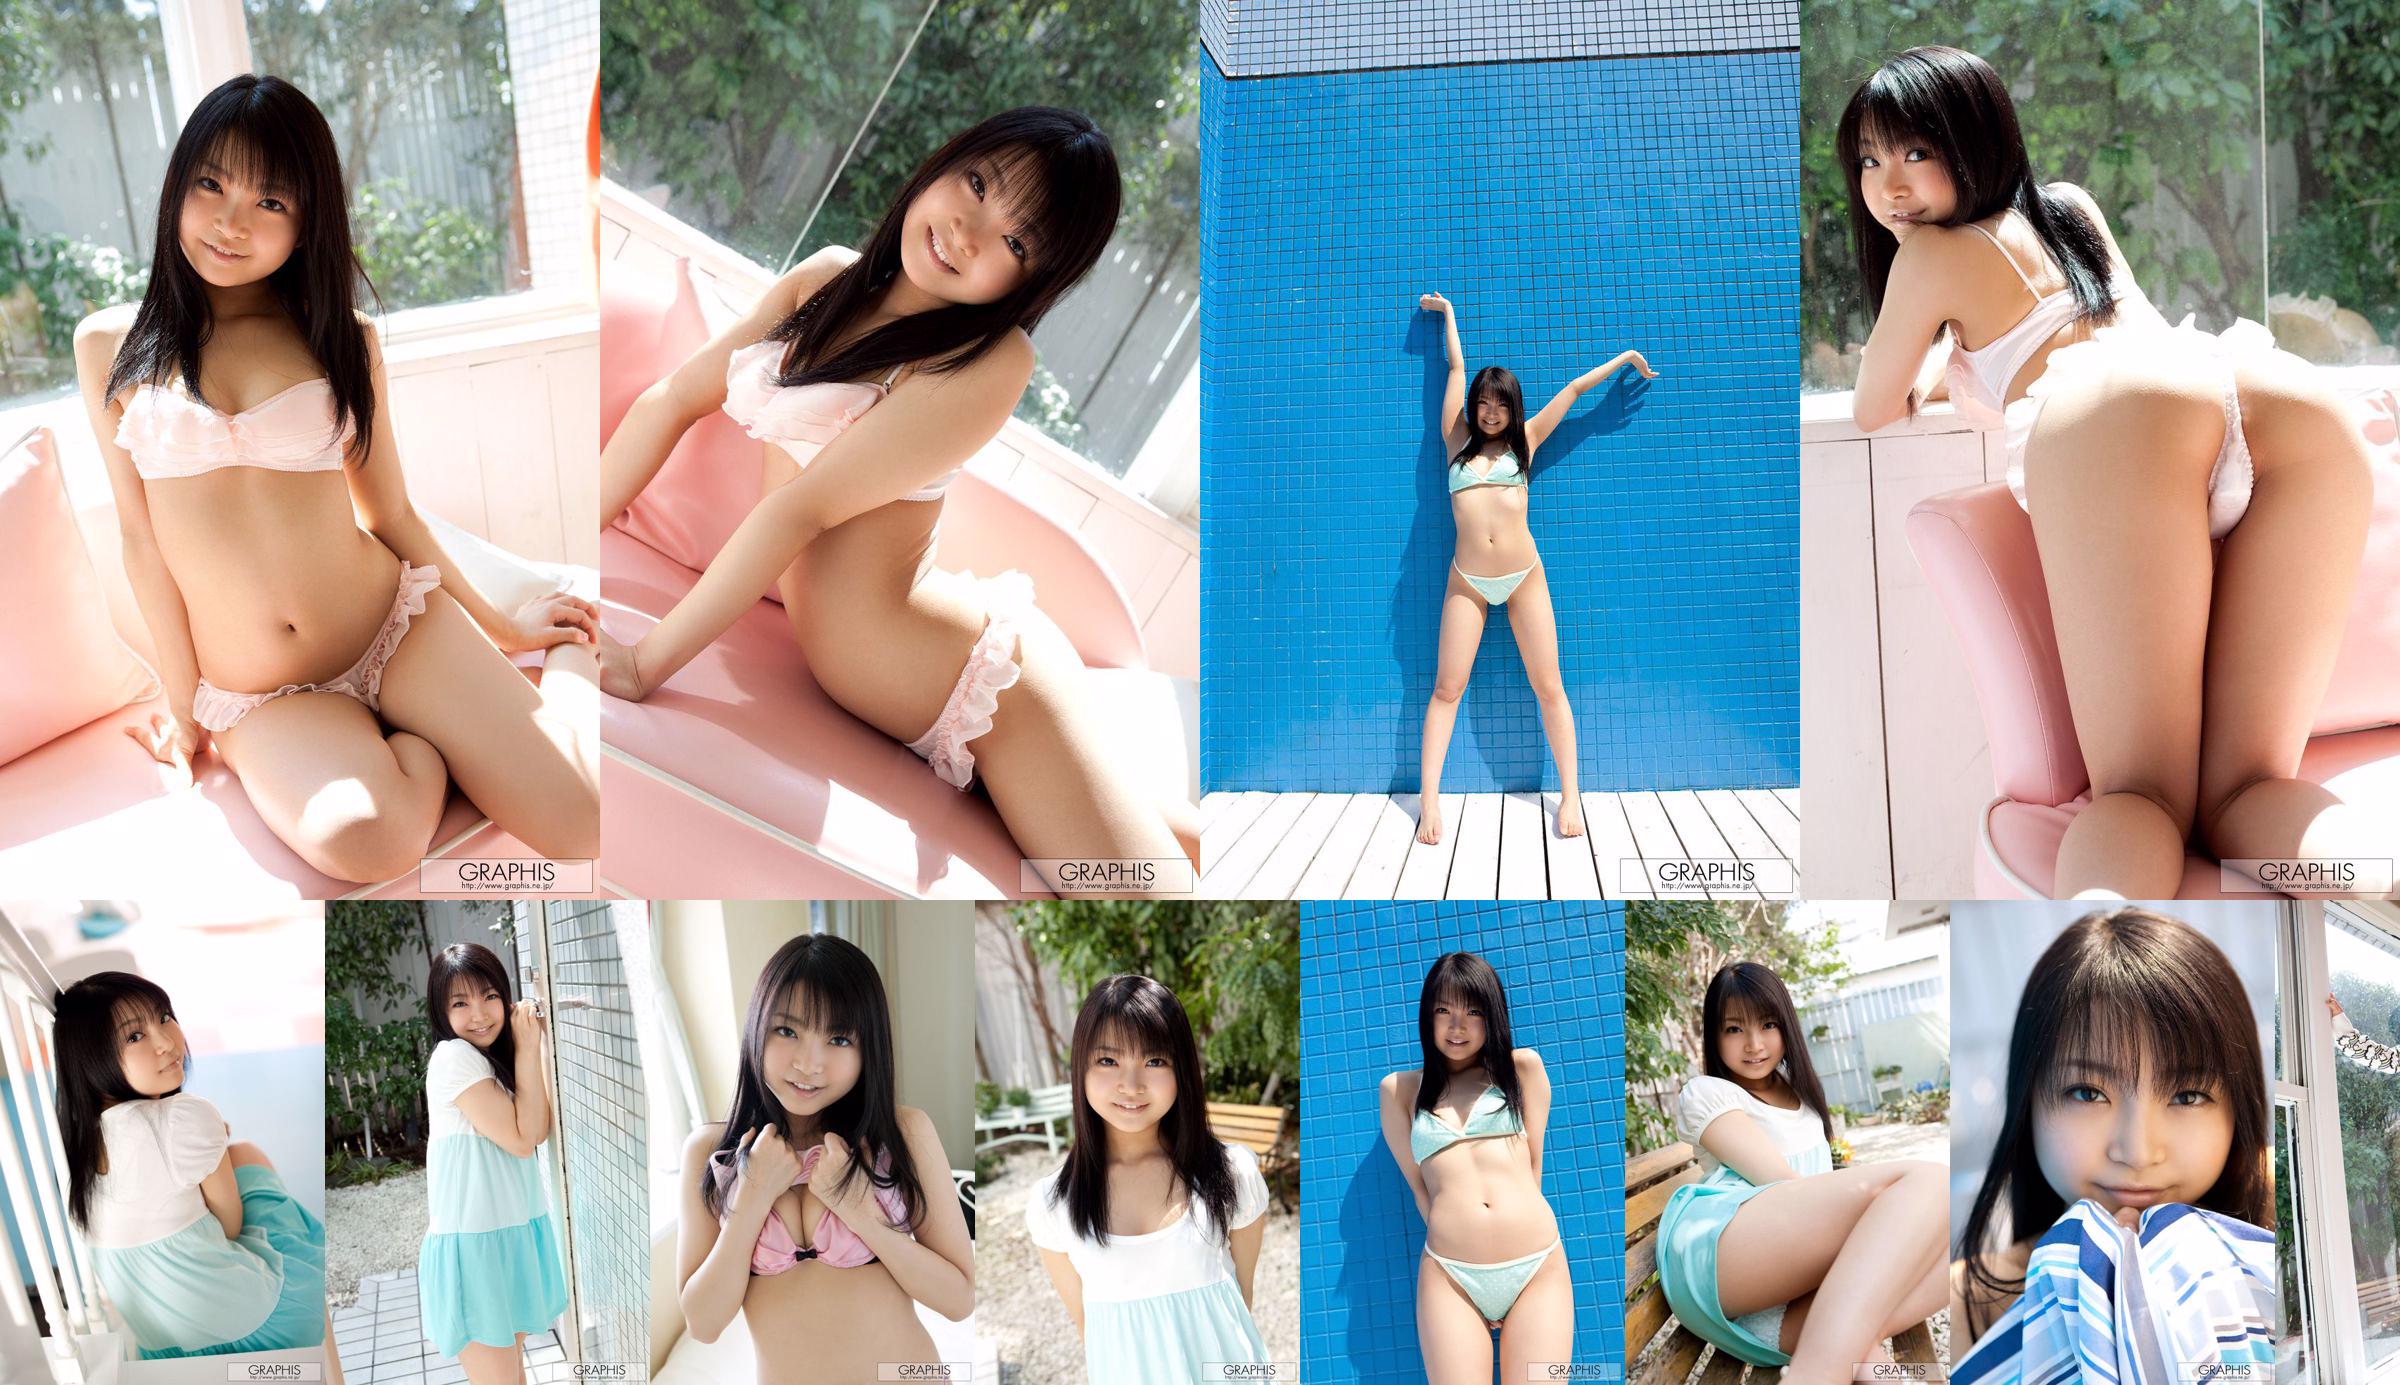 Chihiro Aoi / Chihiro Aoi [Graphis] First Gravure First off dochter No.0711ad Pagina 8